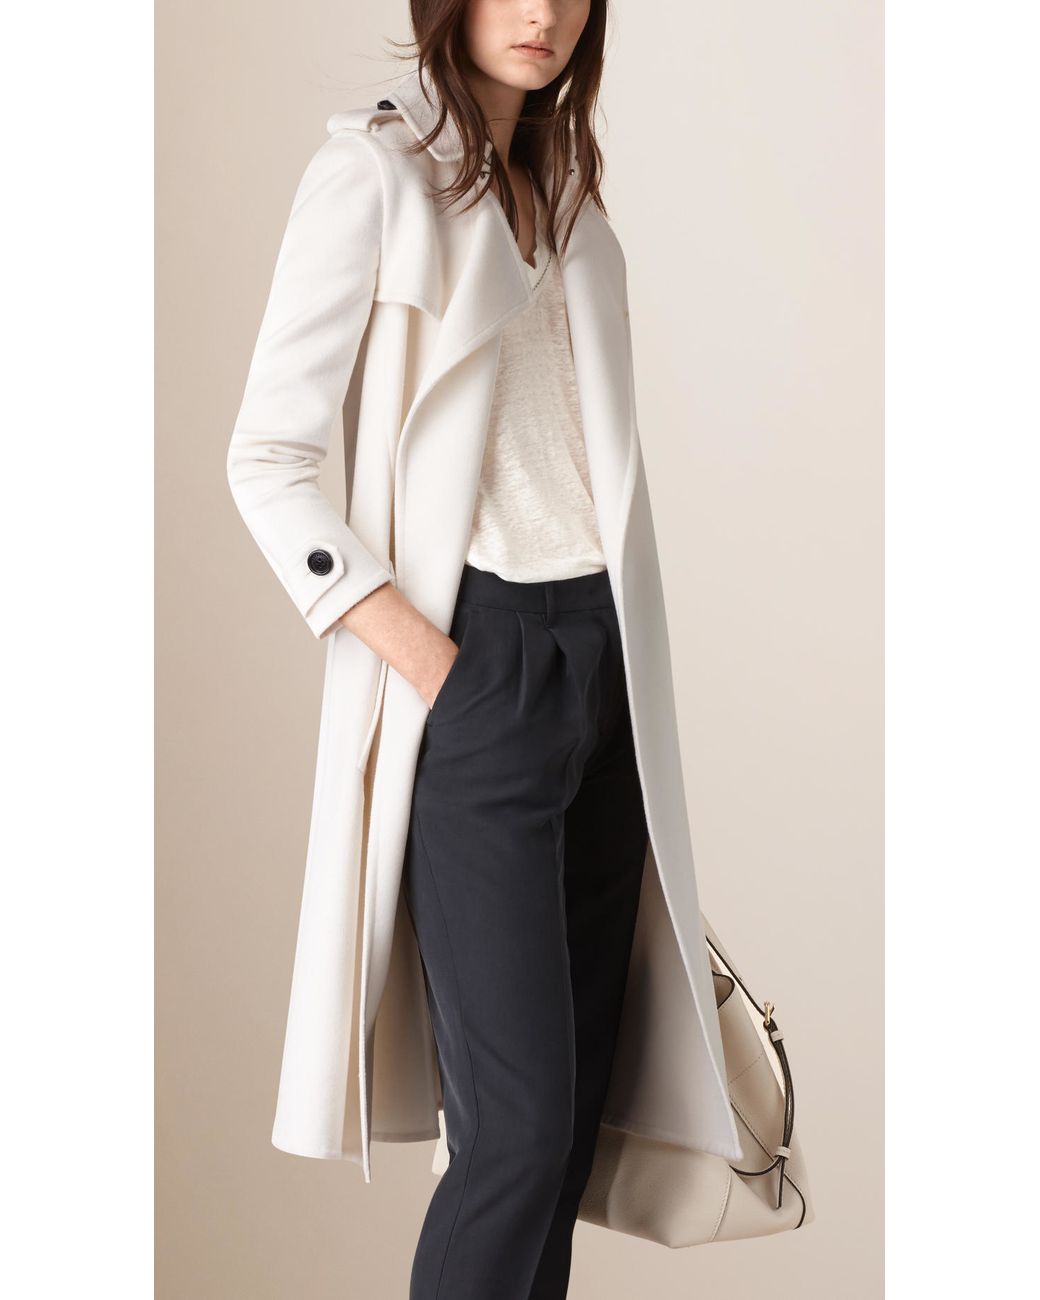 Burberry Double Cashmere Wrap Trench Coat in White | Lyst